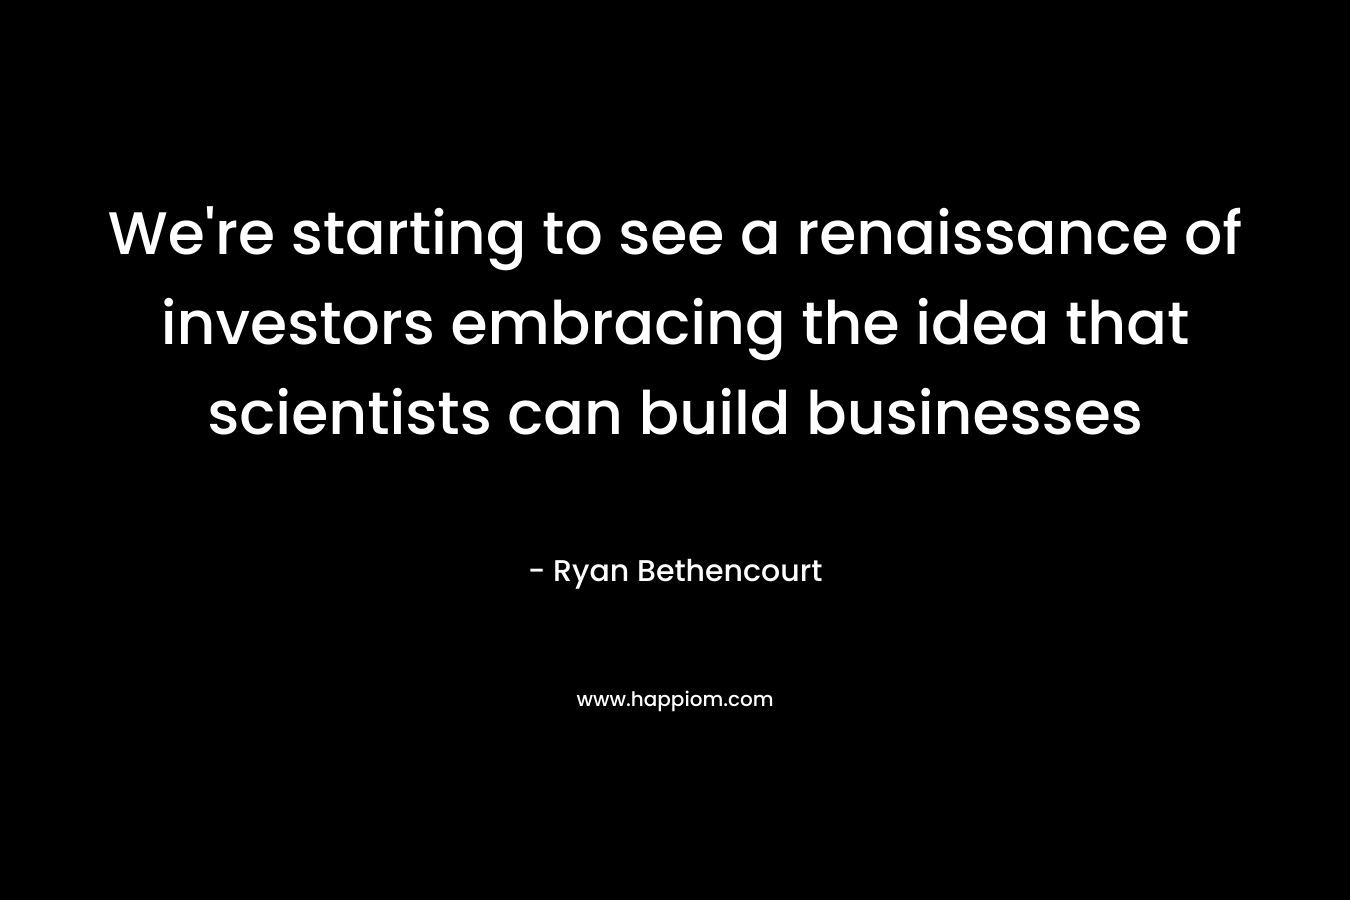 We're starting to see a renaissance of investors embracing the idea that scientists can build businesses